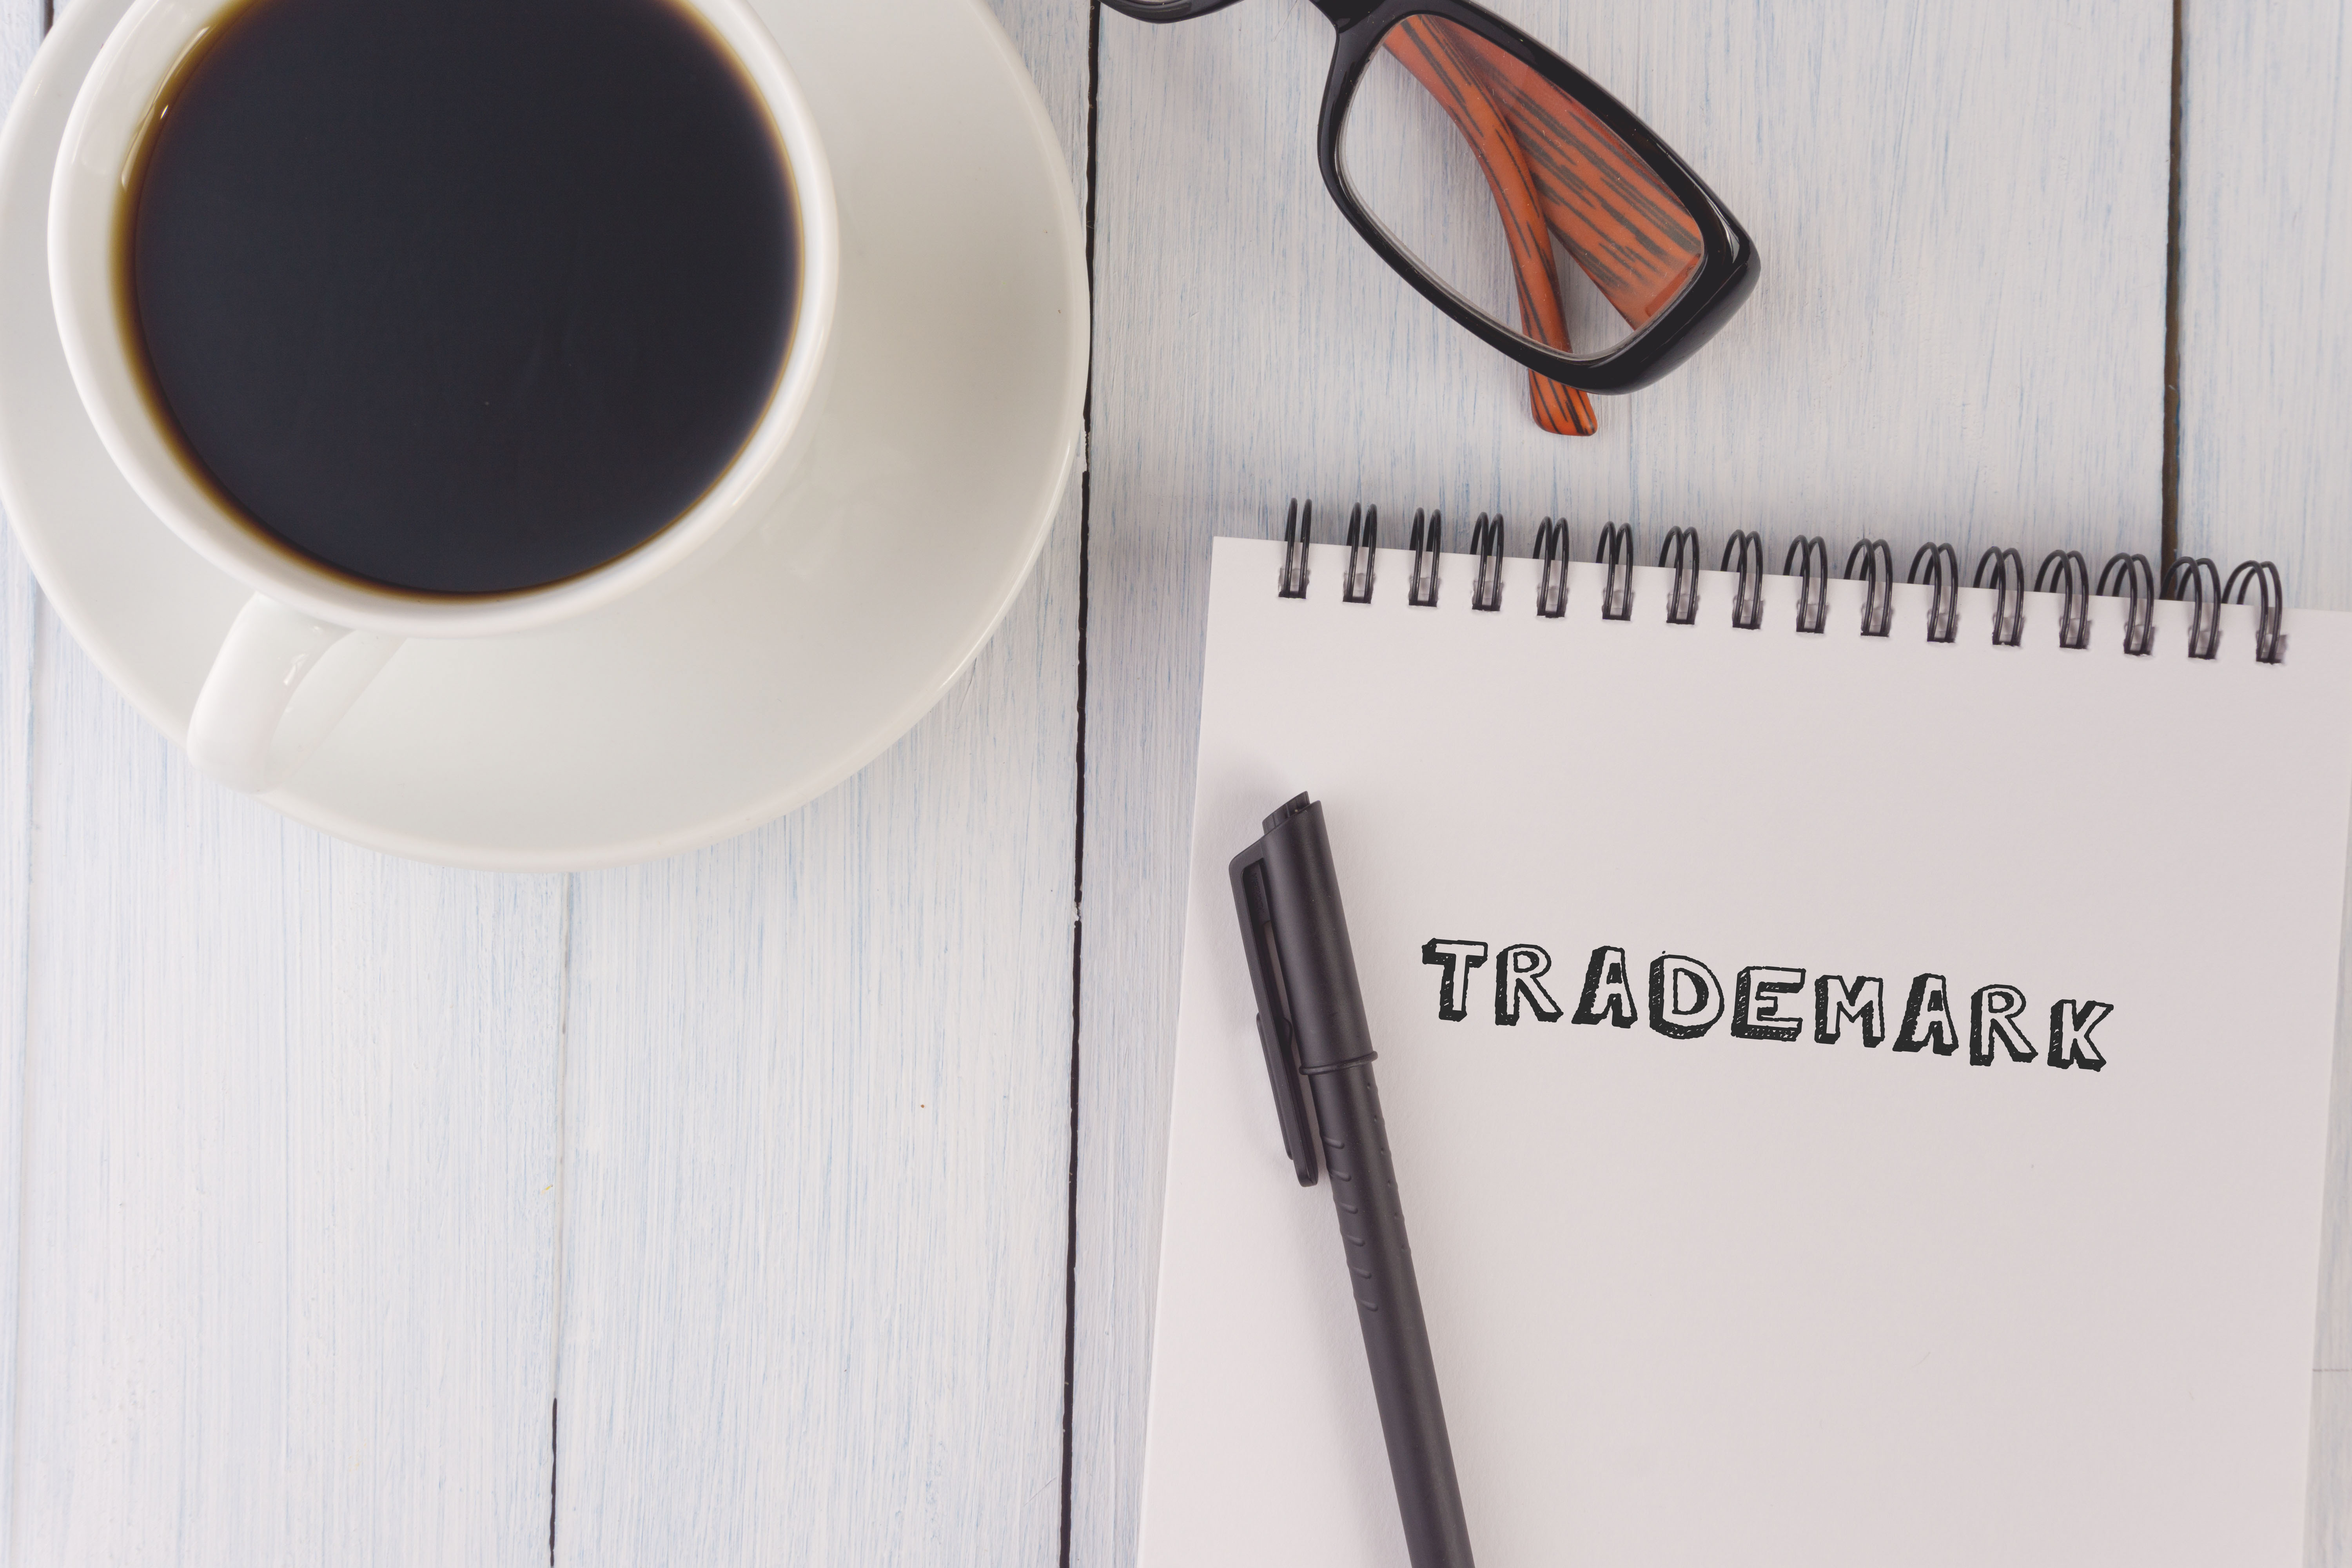 Common mistakes when applying for a trademark in US